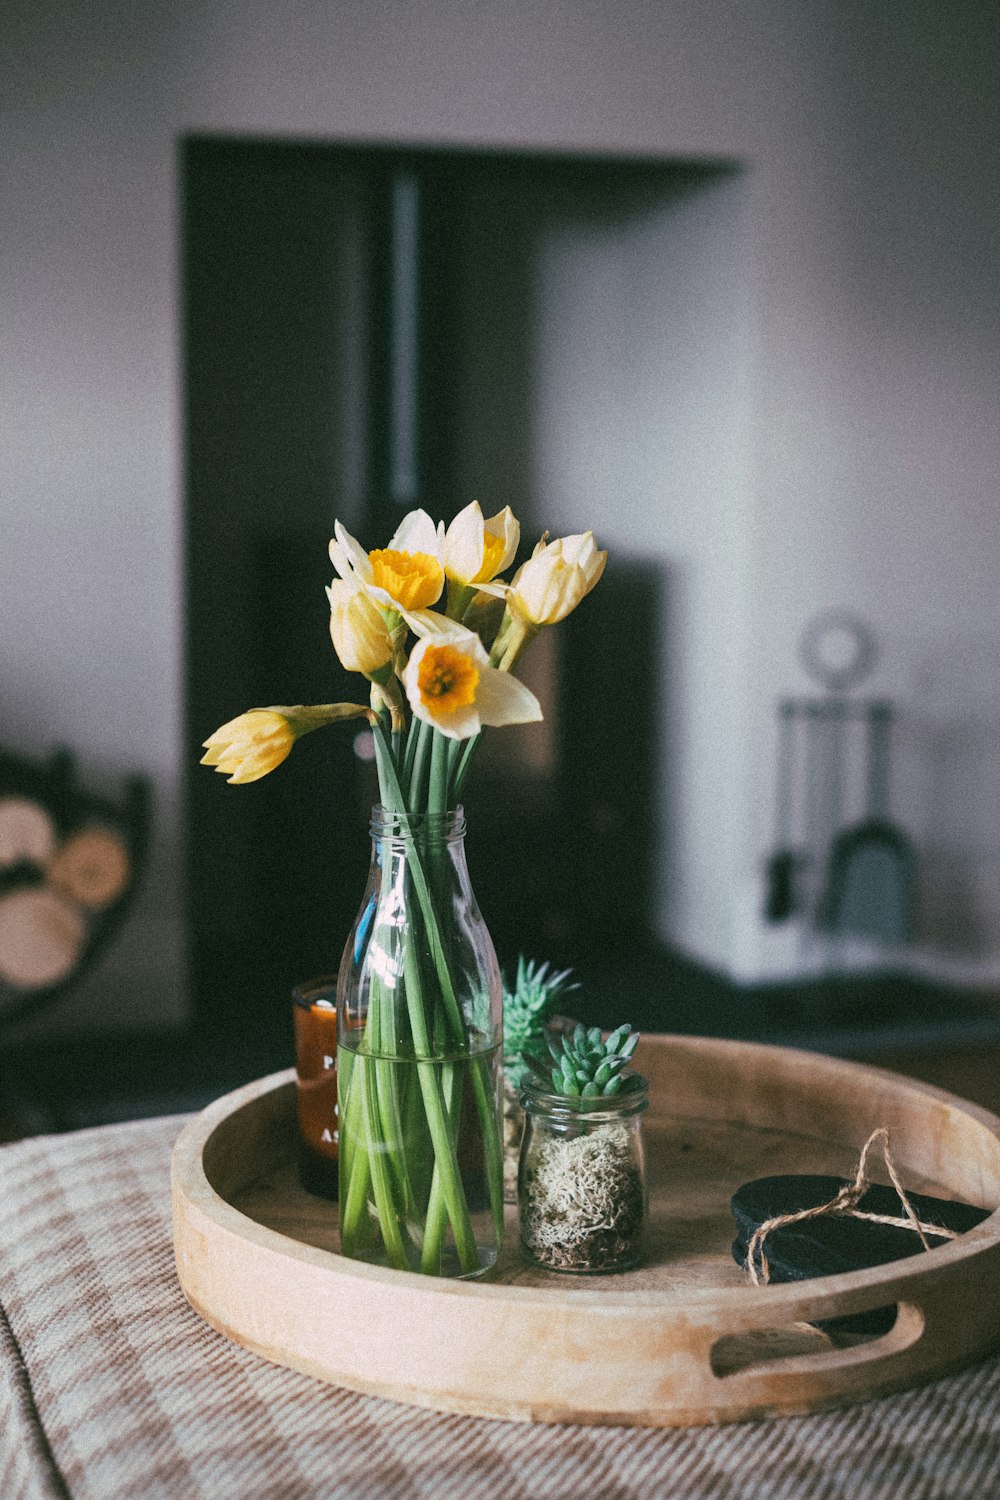 yellow daffodils in clear glass vase on brown wooden table